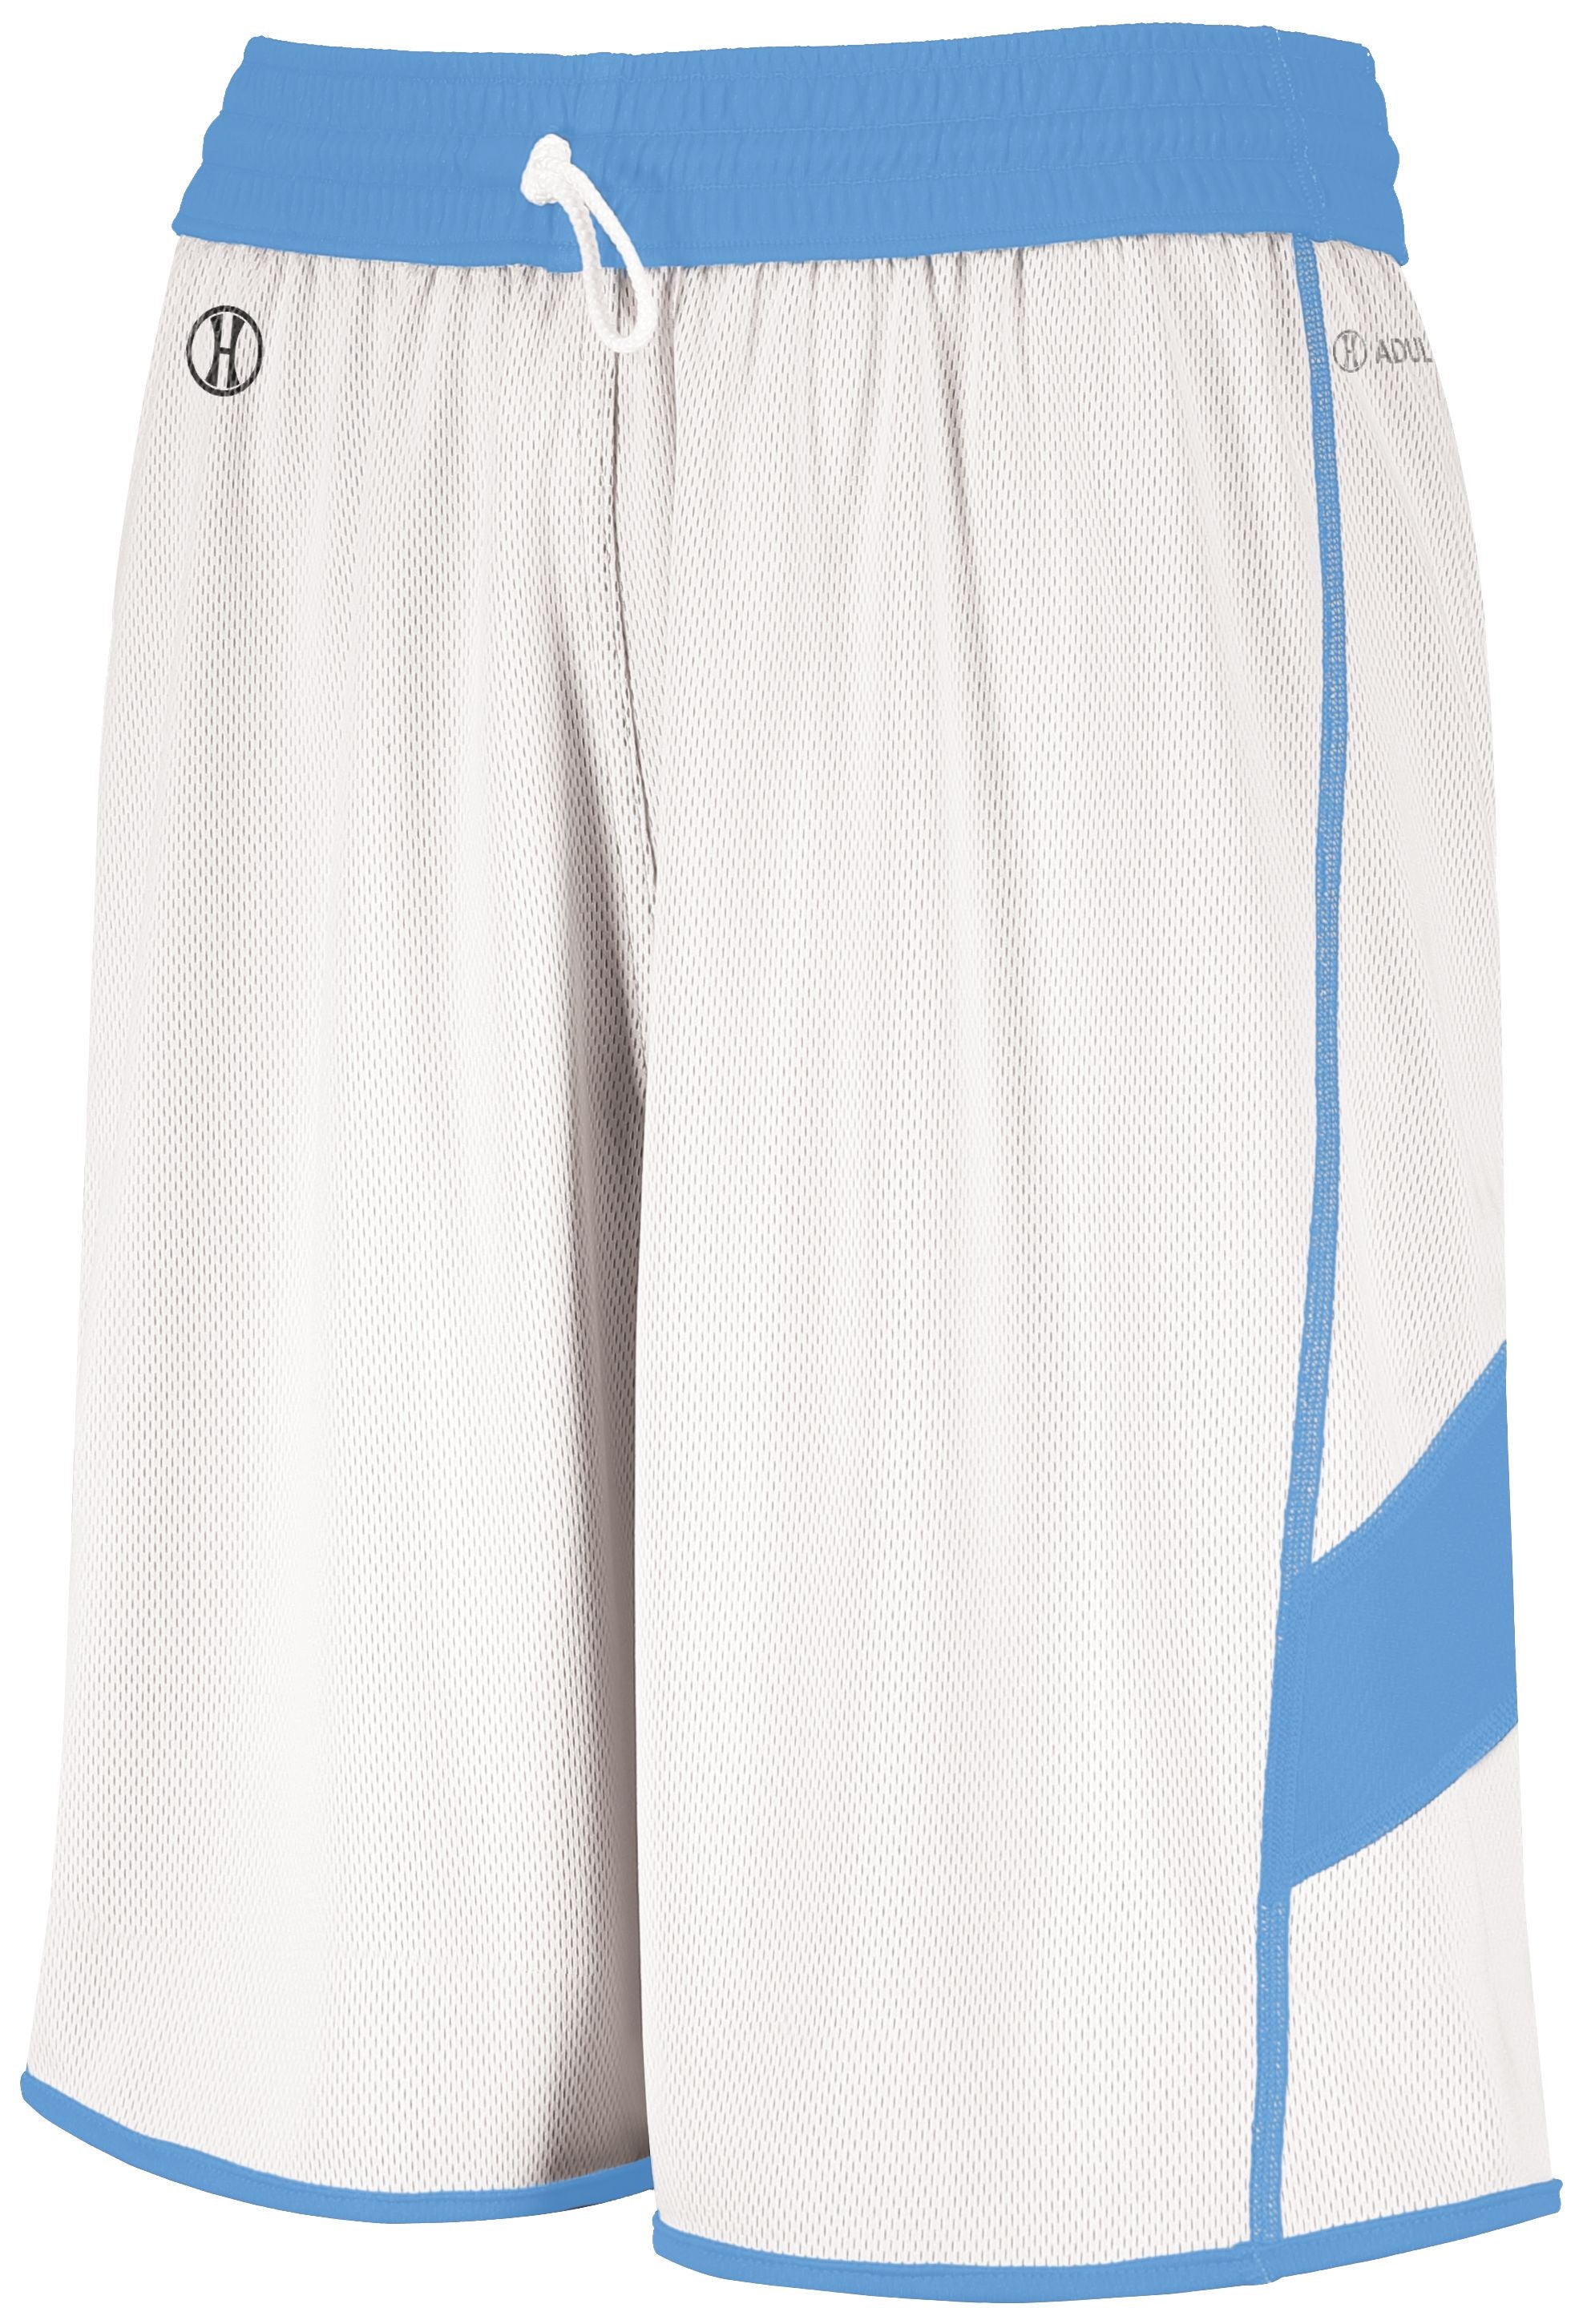 Holloway Dual-Side Single Ply Shorts in University Blue/White  -Part of the Adult, Adult-Shorts, Basketball, Holloway, All-Sports, All-Sports-1 product lines at KanaleyCreations.com